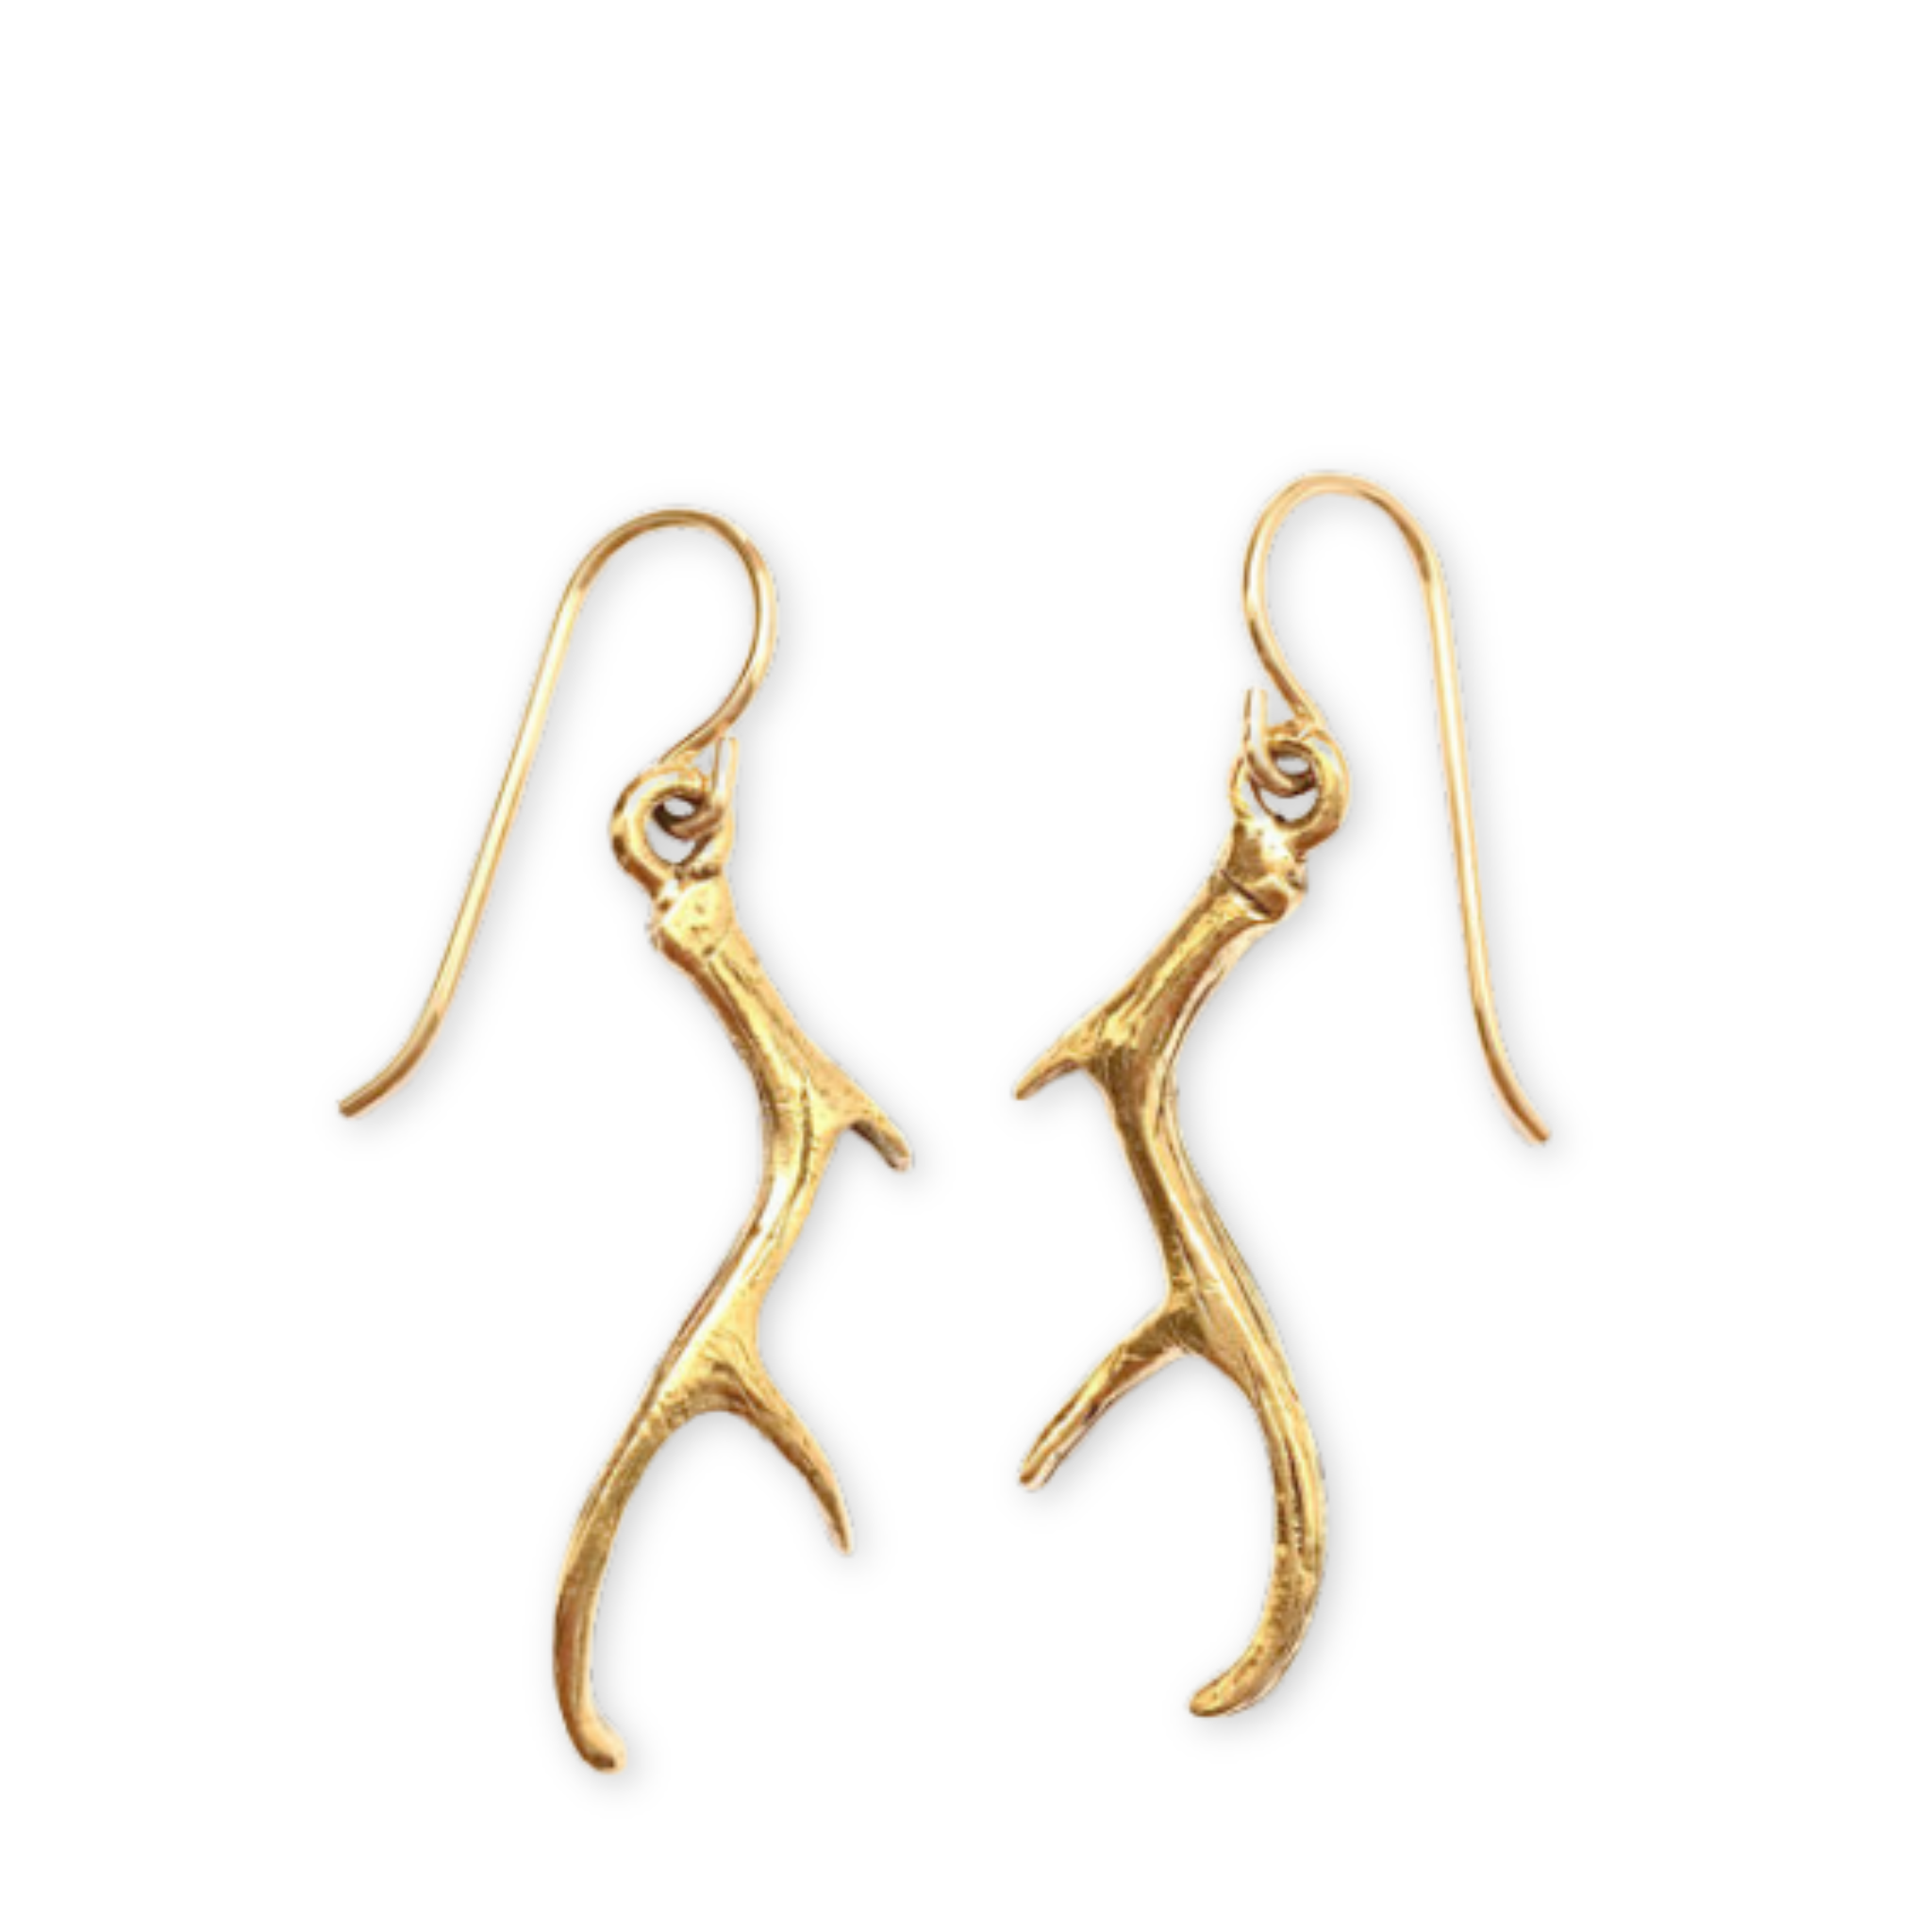 gold earrings with antlers